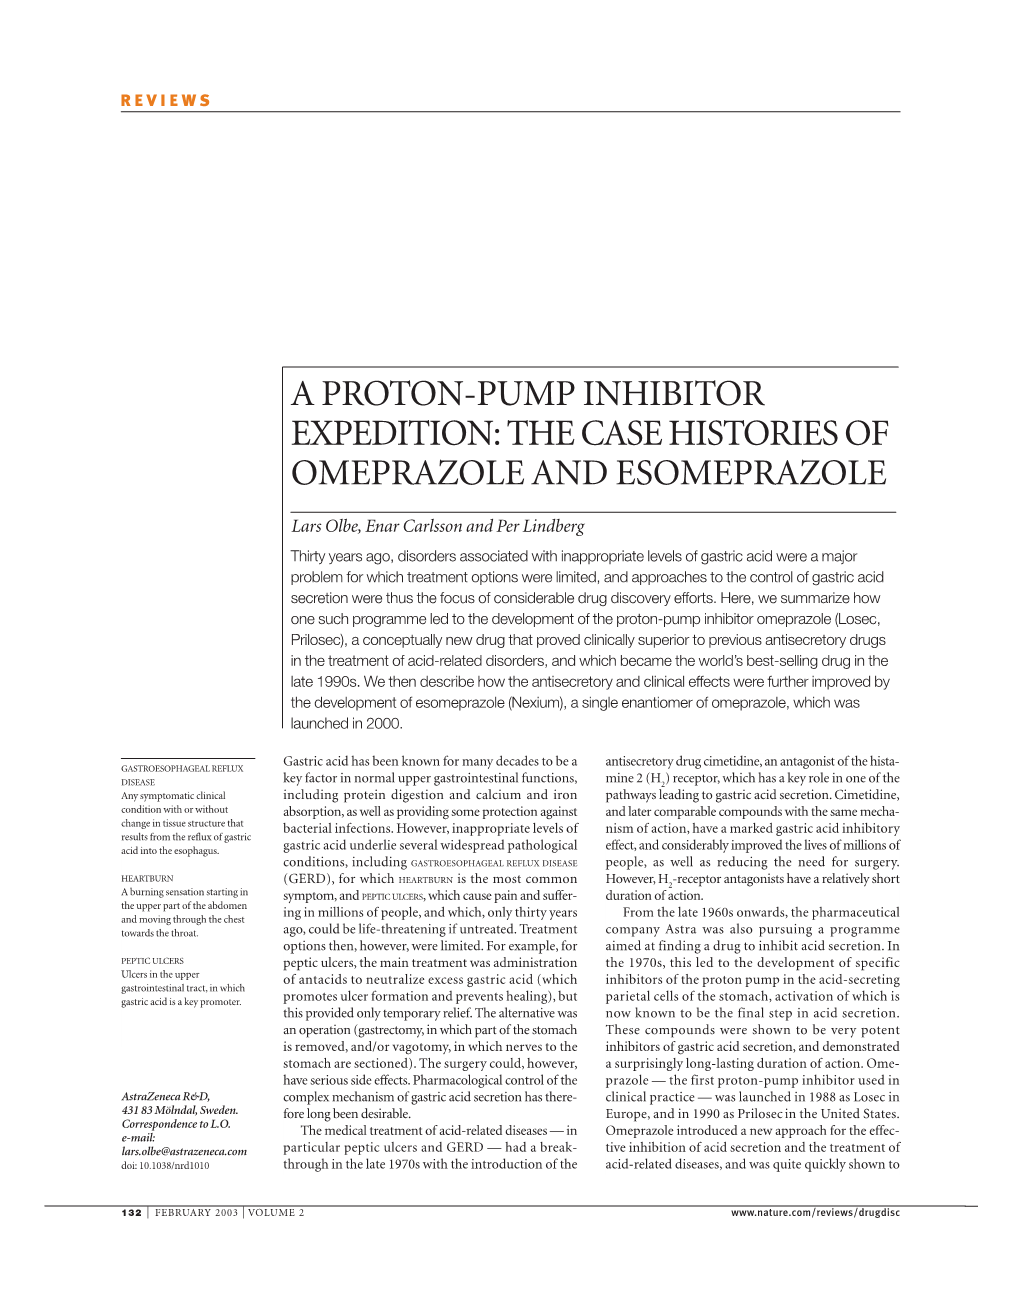 A Proton-Pump Inhibitor Expedition: the Case Histories of Omeprazole and Esomeprazole